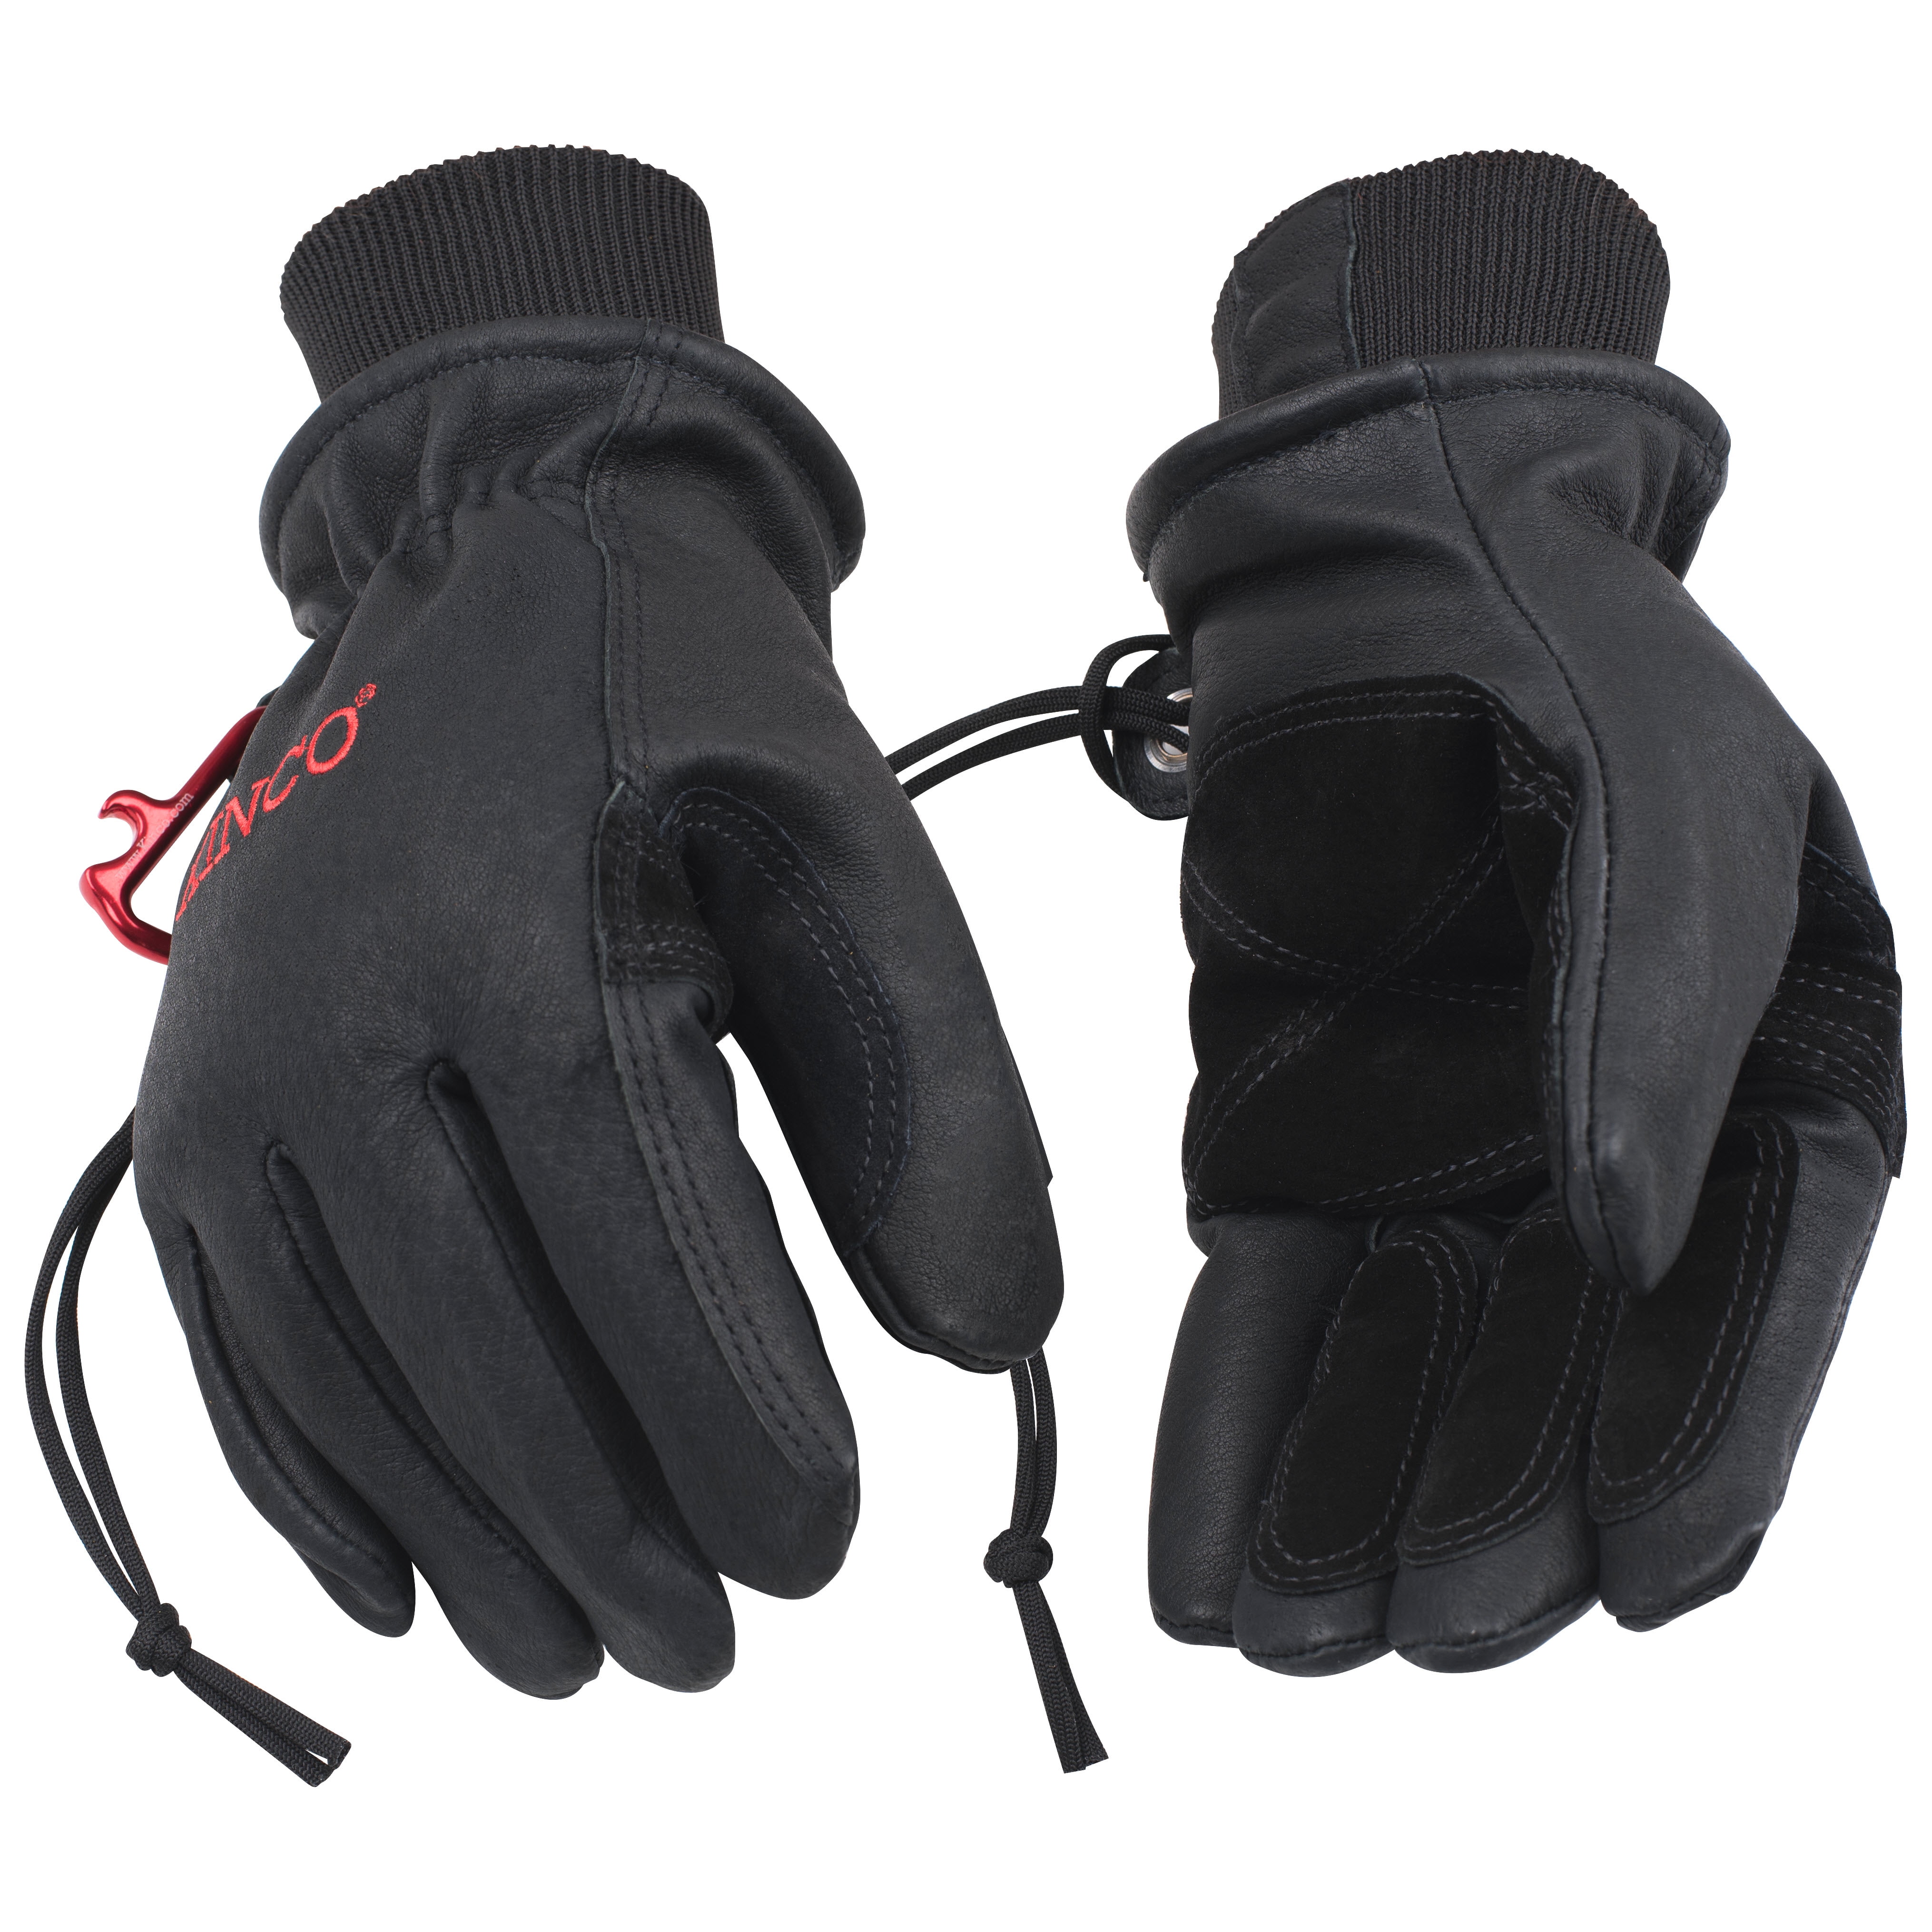 BRAND R REAL COW LEATHER BLACK COLOR THREAD WORKOUT,HEAVYLIFT TRAINING GLOVES 